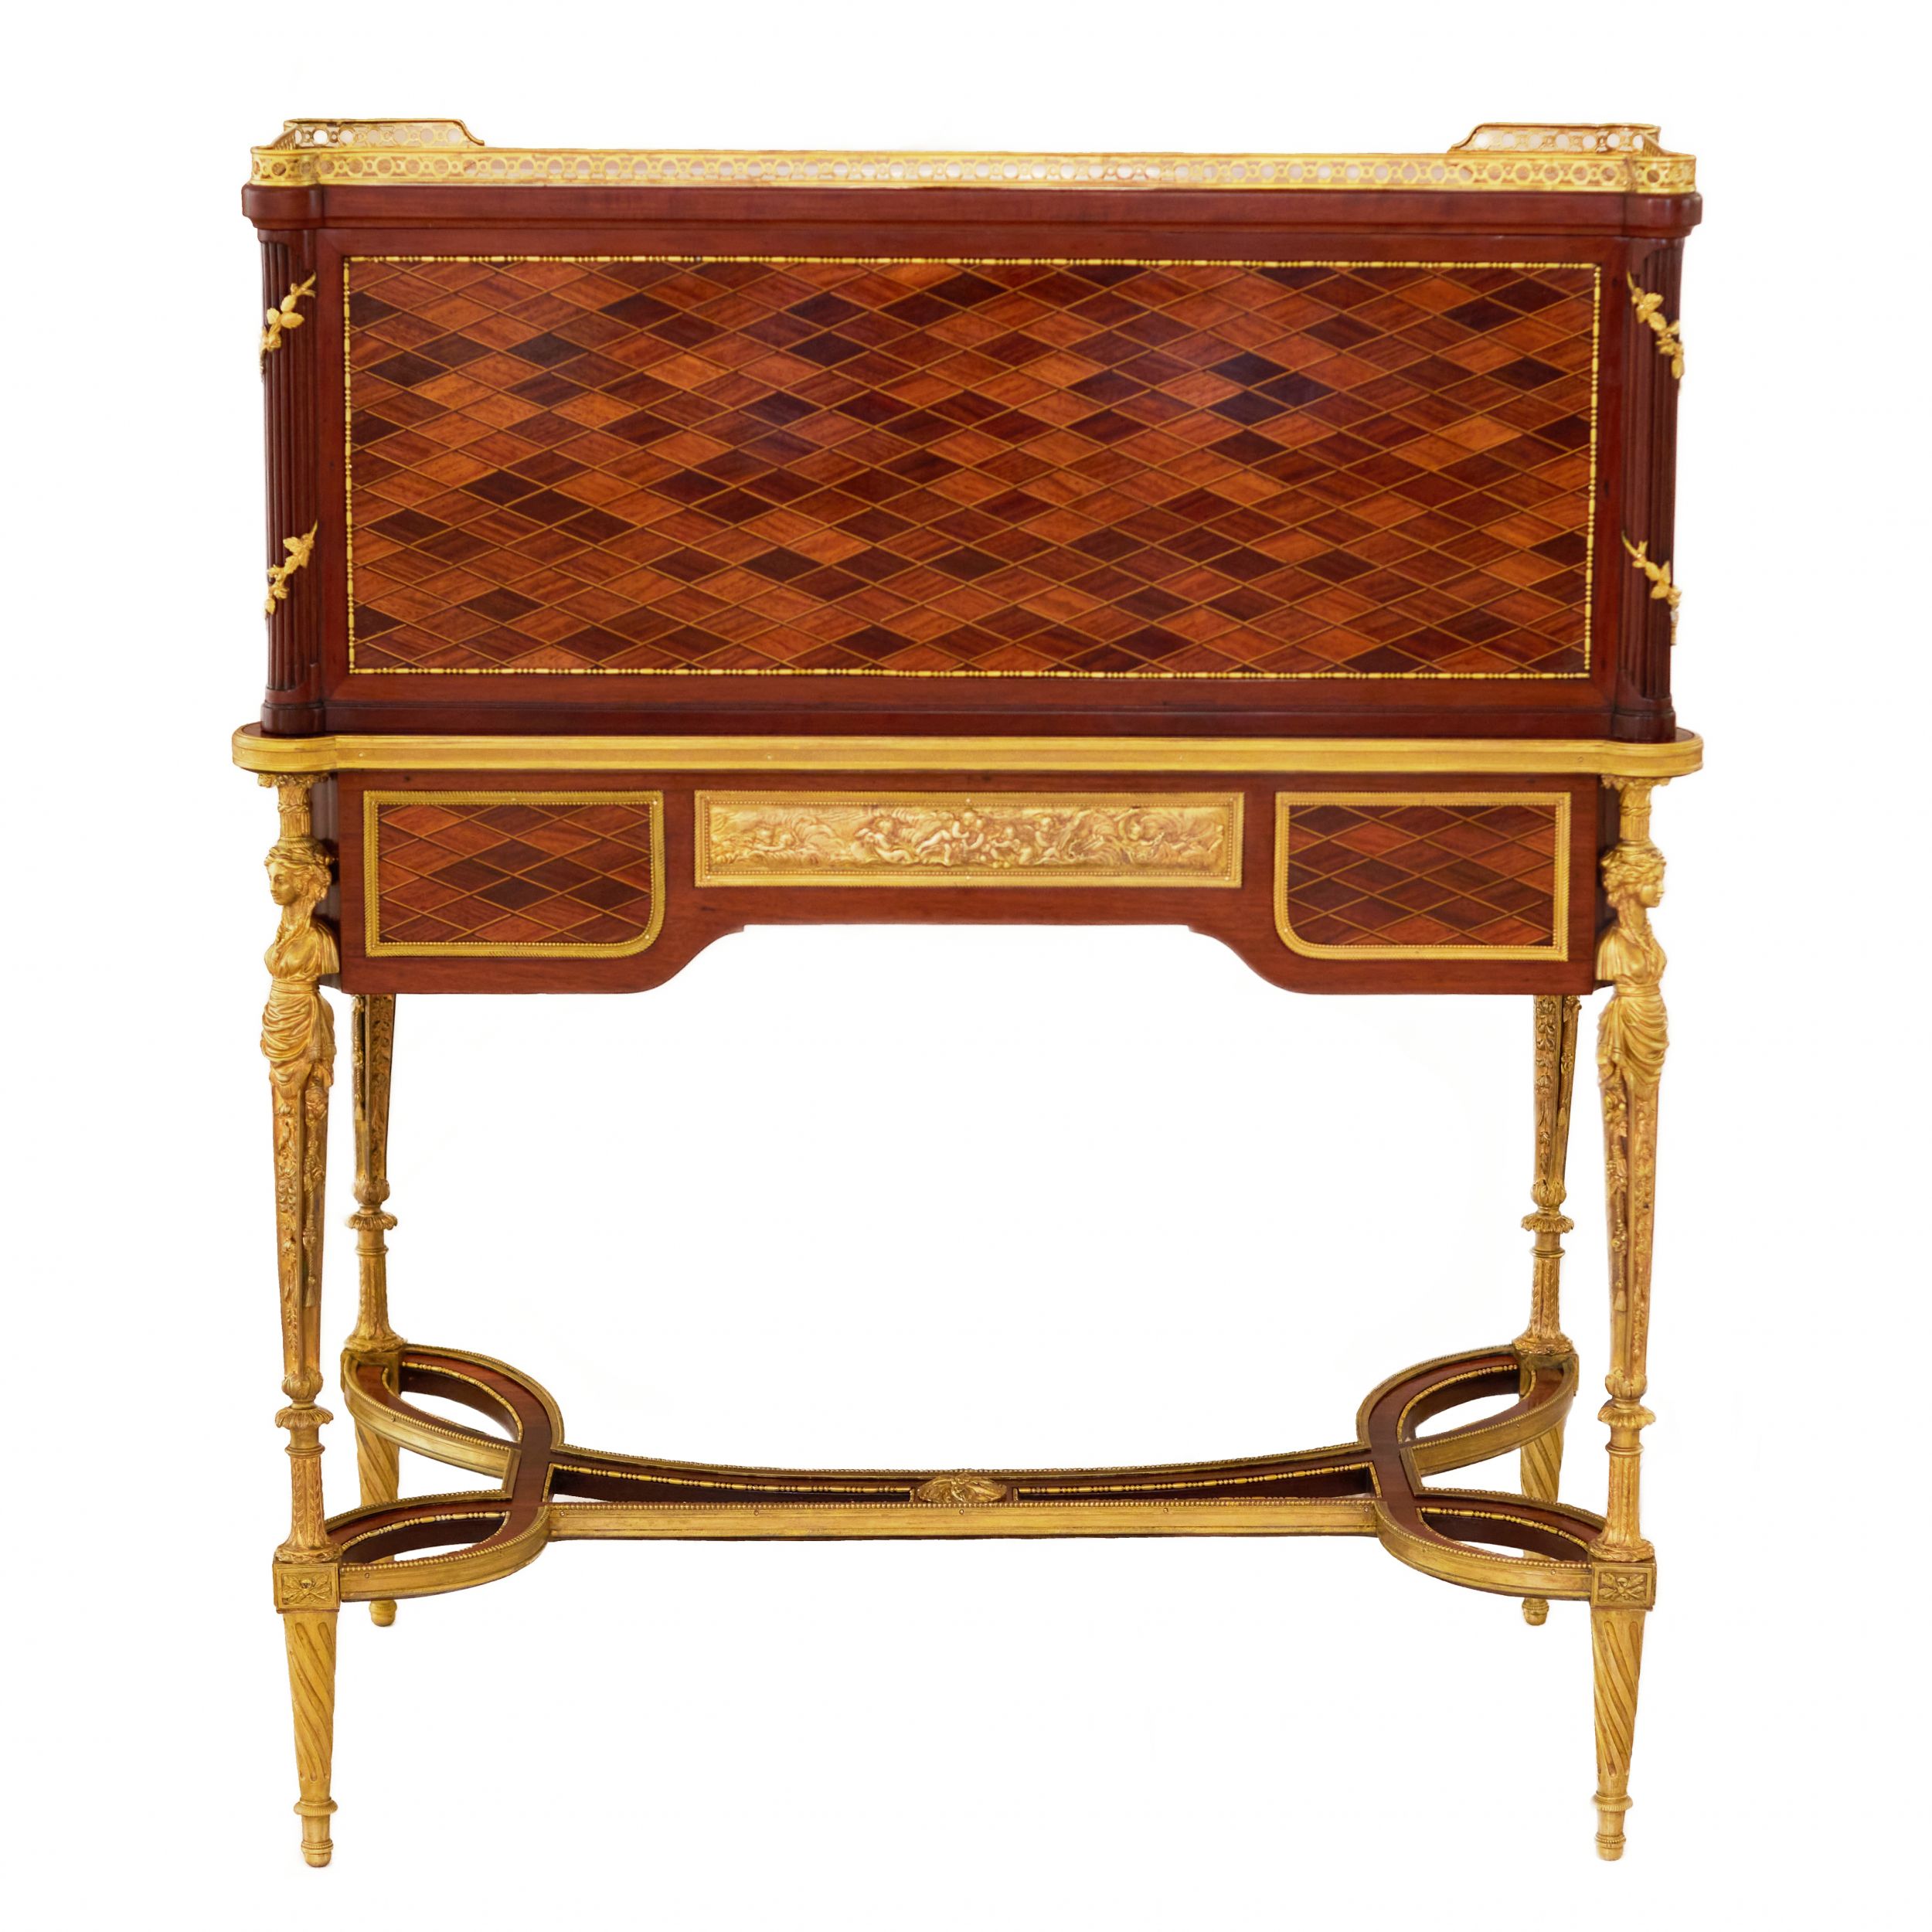 E.KAHN. A magnificent cylindrical bureau in mahogany and satin wood with gilt bronze. - Image 9 of 14